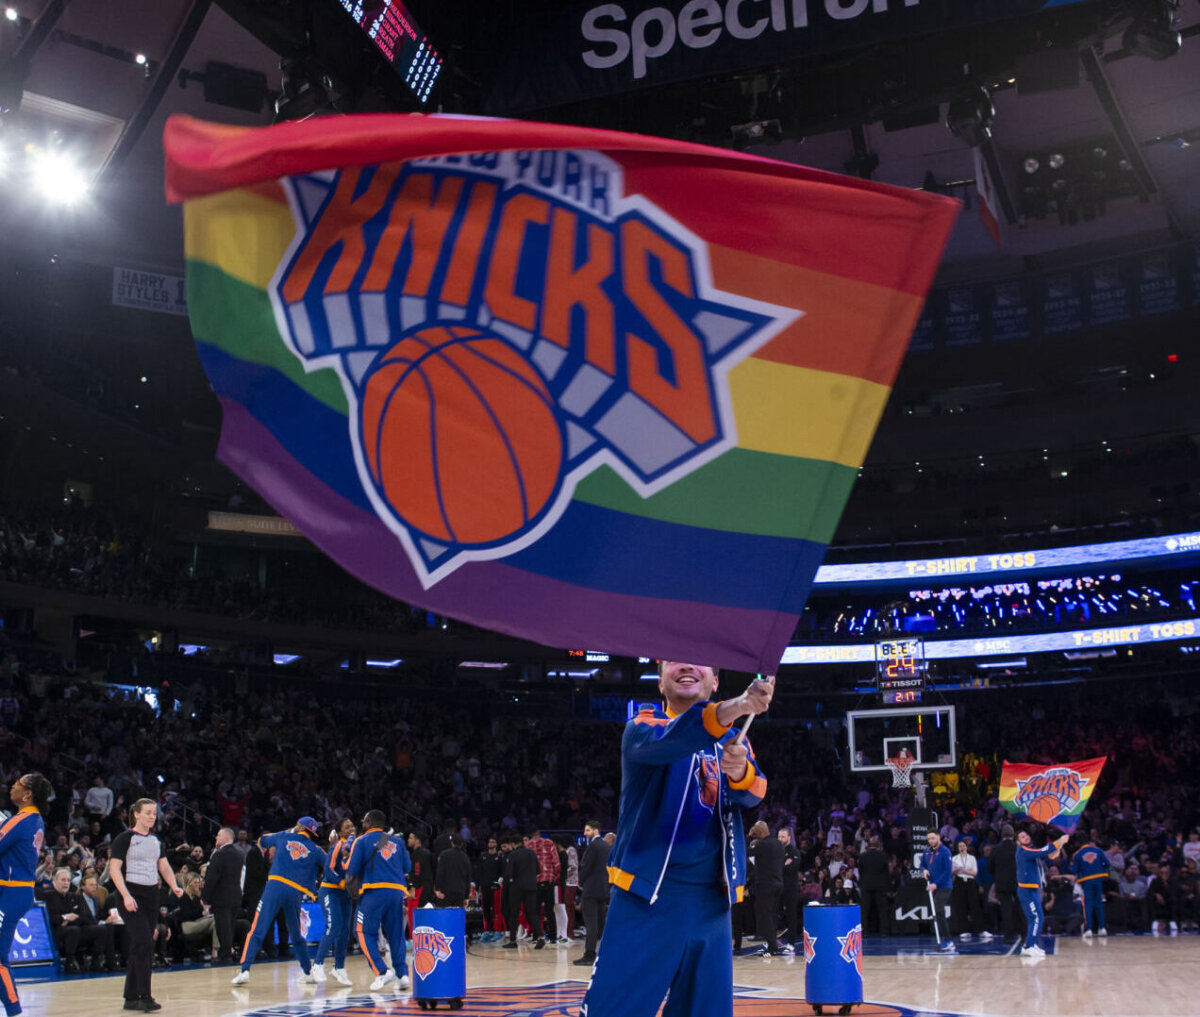 The Knicks featured Rainbow Flags on the court during Pride Ngiht festivities.